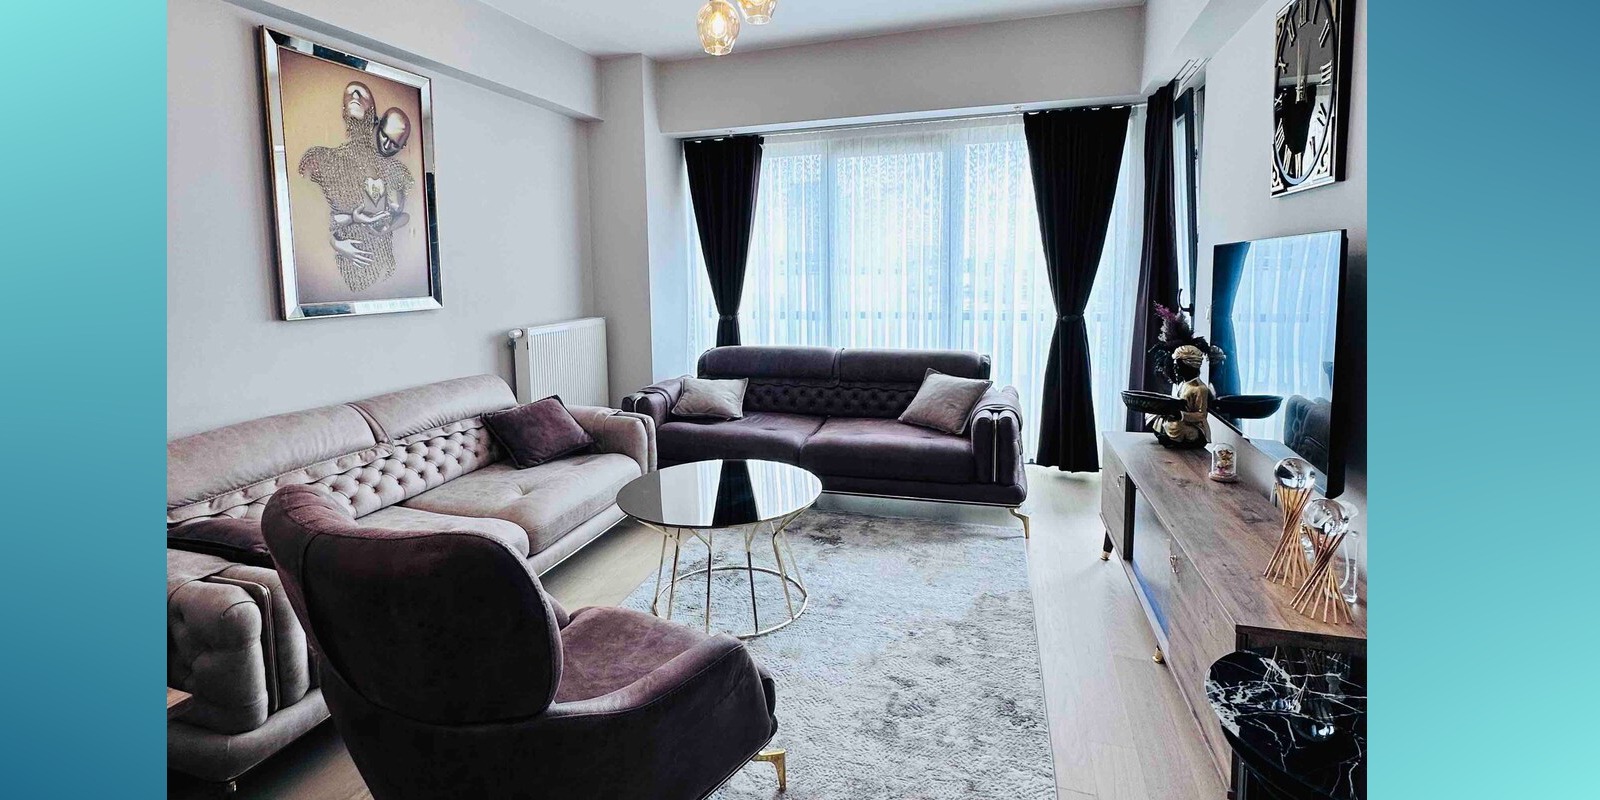 Furnished, modern residential two bedroom Istanbul apartment for rent in new residential complex in Bagcilar, Istanbul.